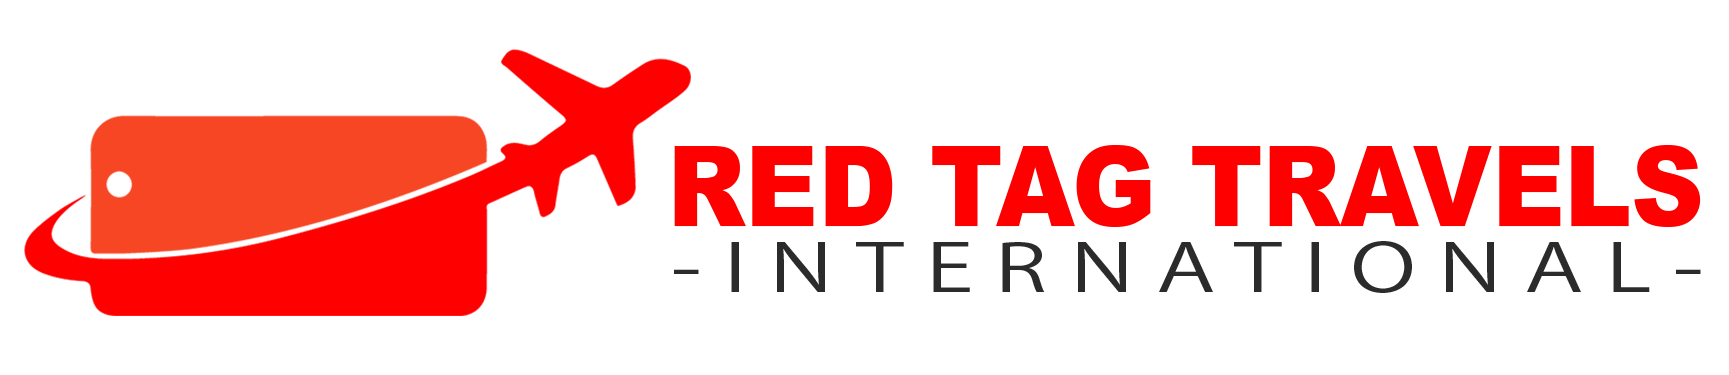 Red Travel Logo - Red Tag Travels Travel Business Buddy